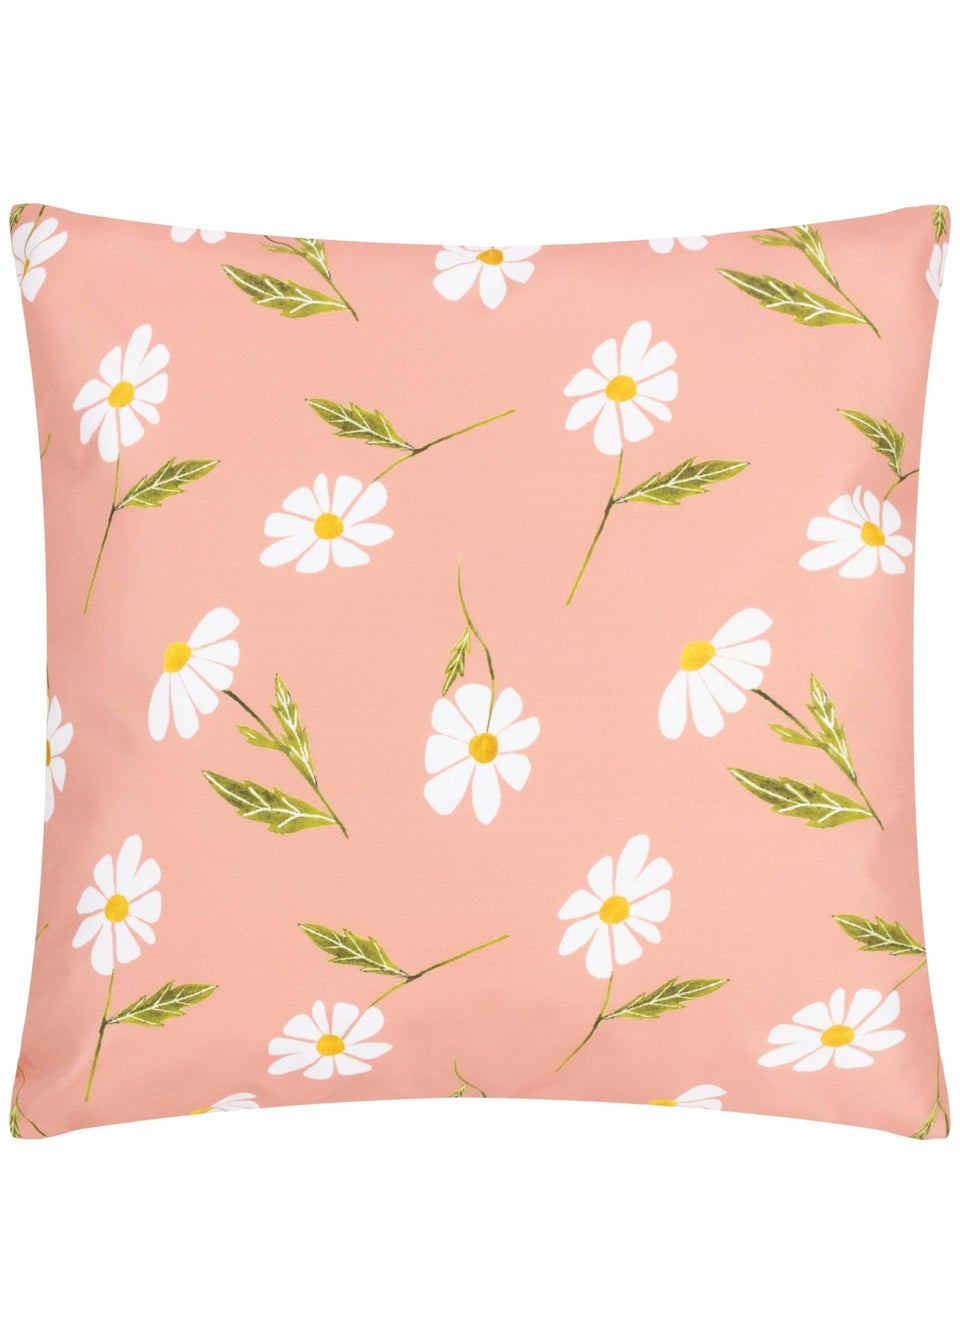 Wylder Nature Yellow Daisies Filled Outdoor Cushions (30cm x 50cm x 8cm)